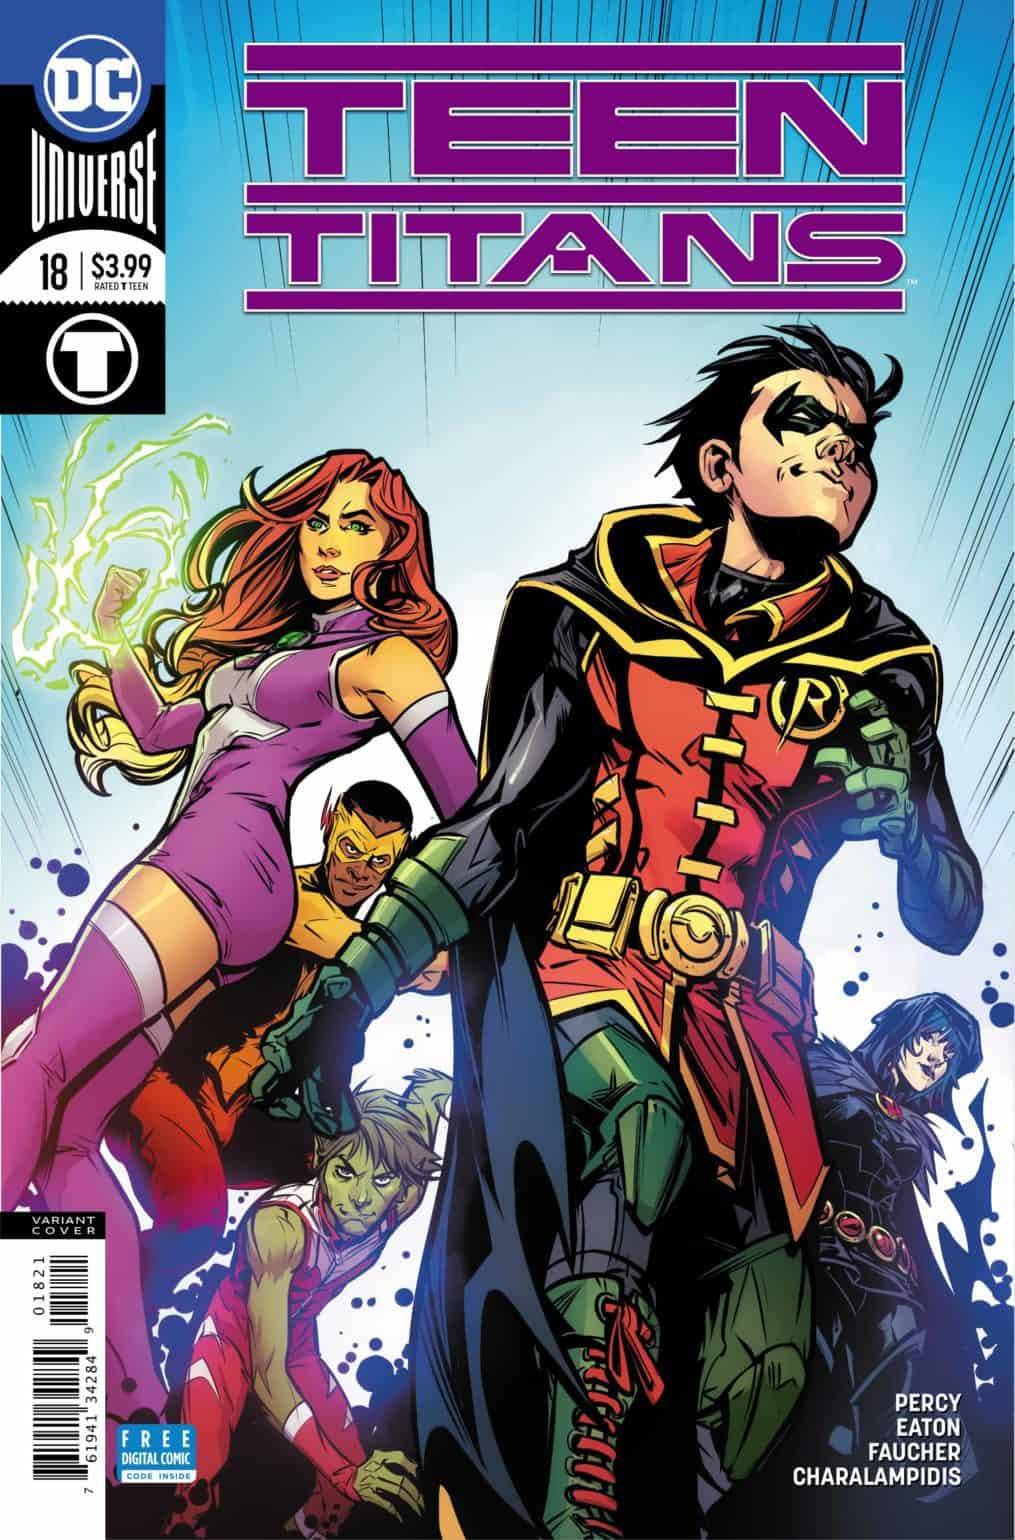 Exclusive Preview: TEEN TITANS #18